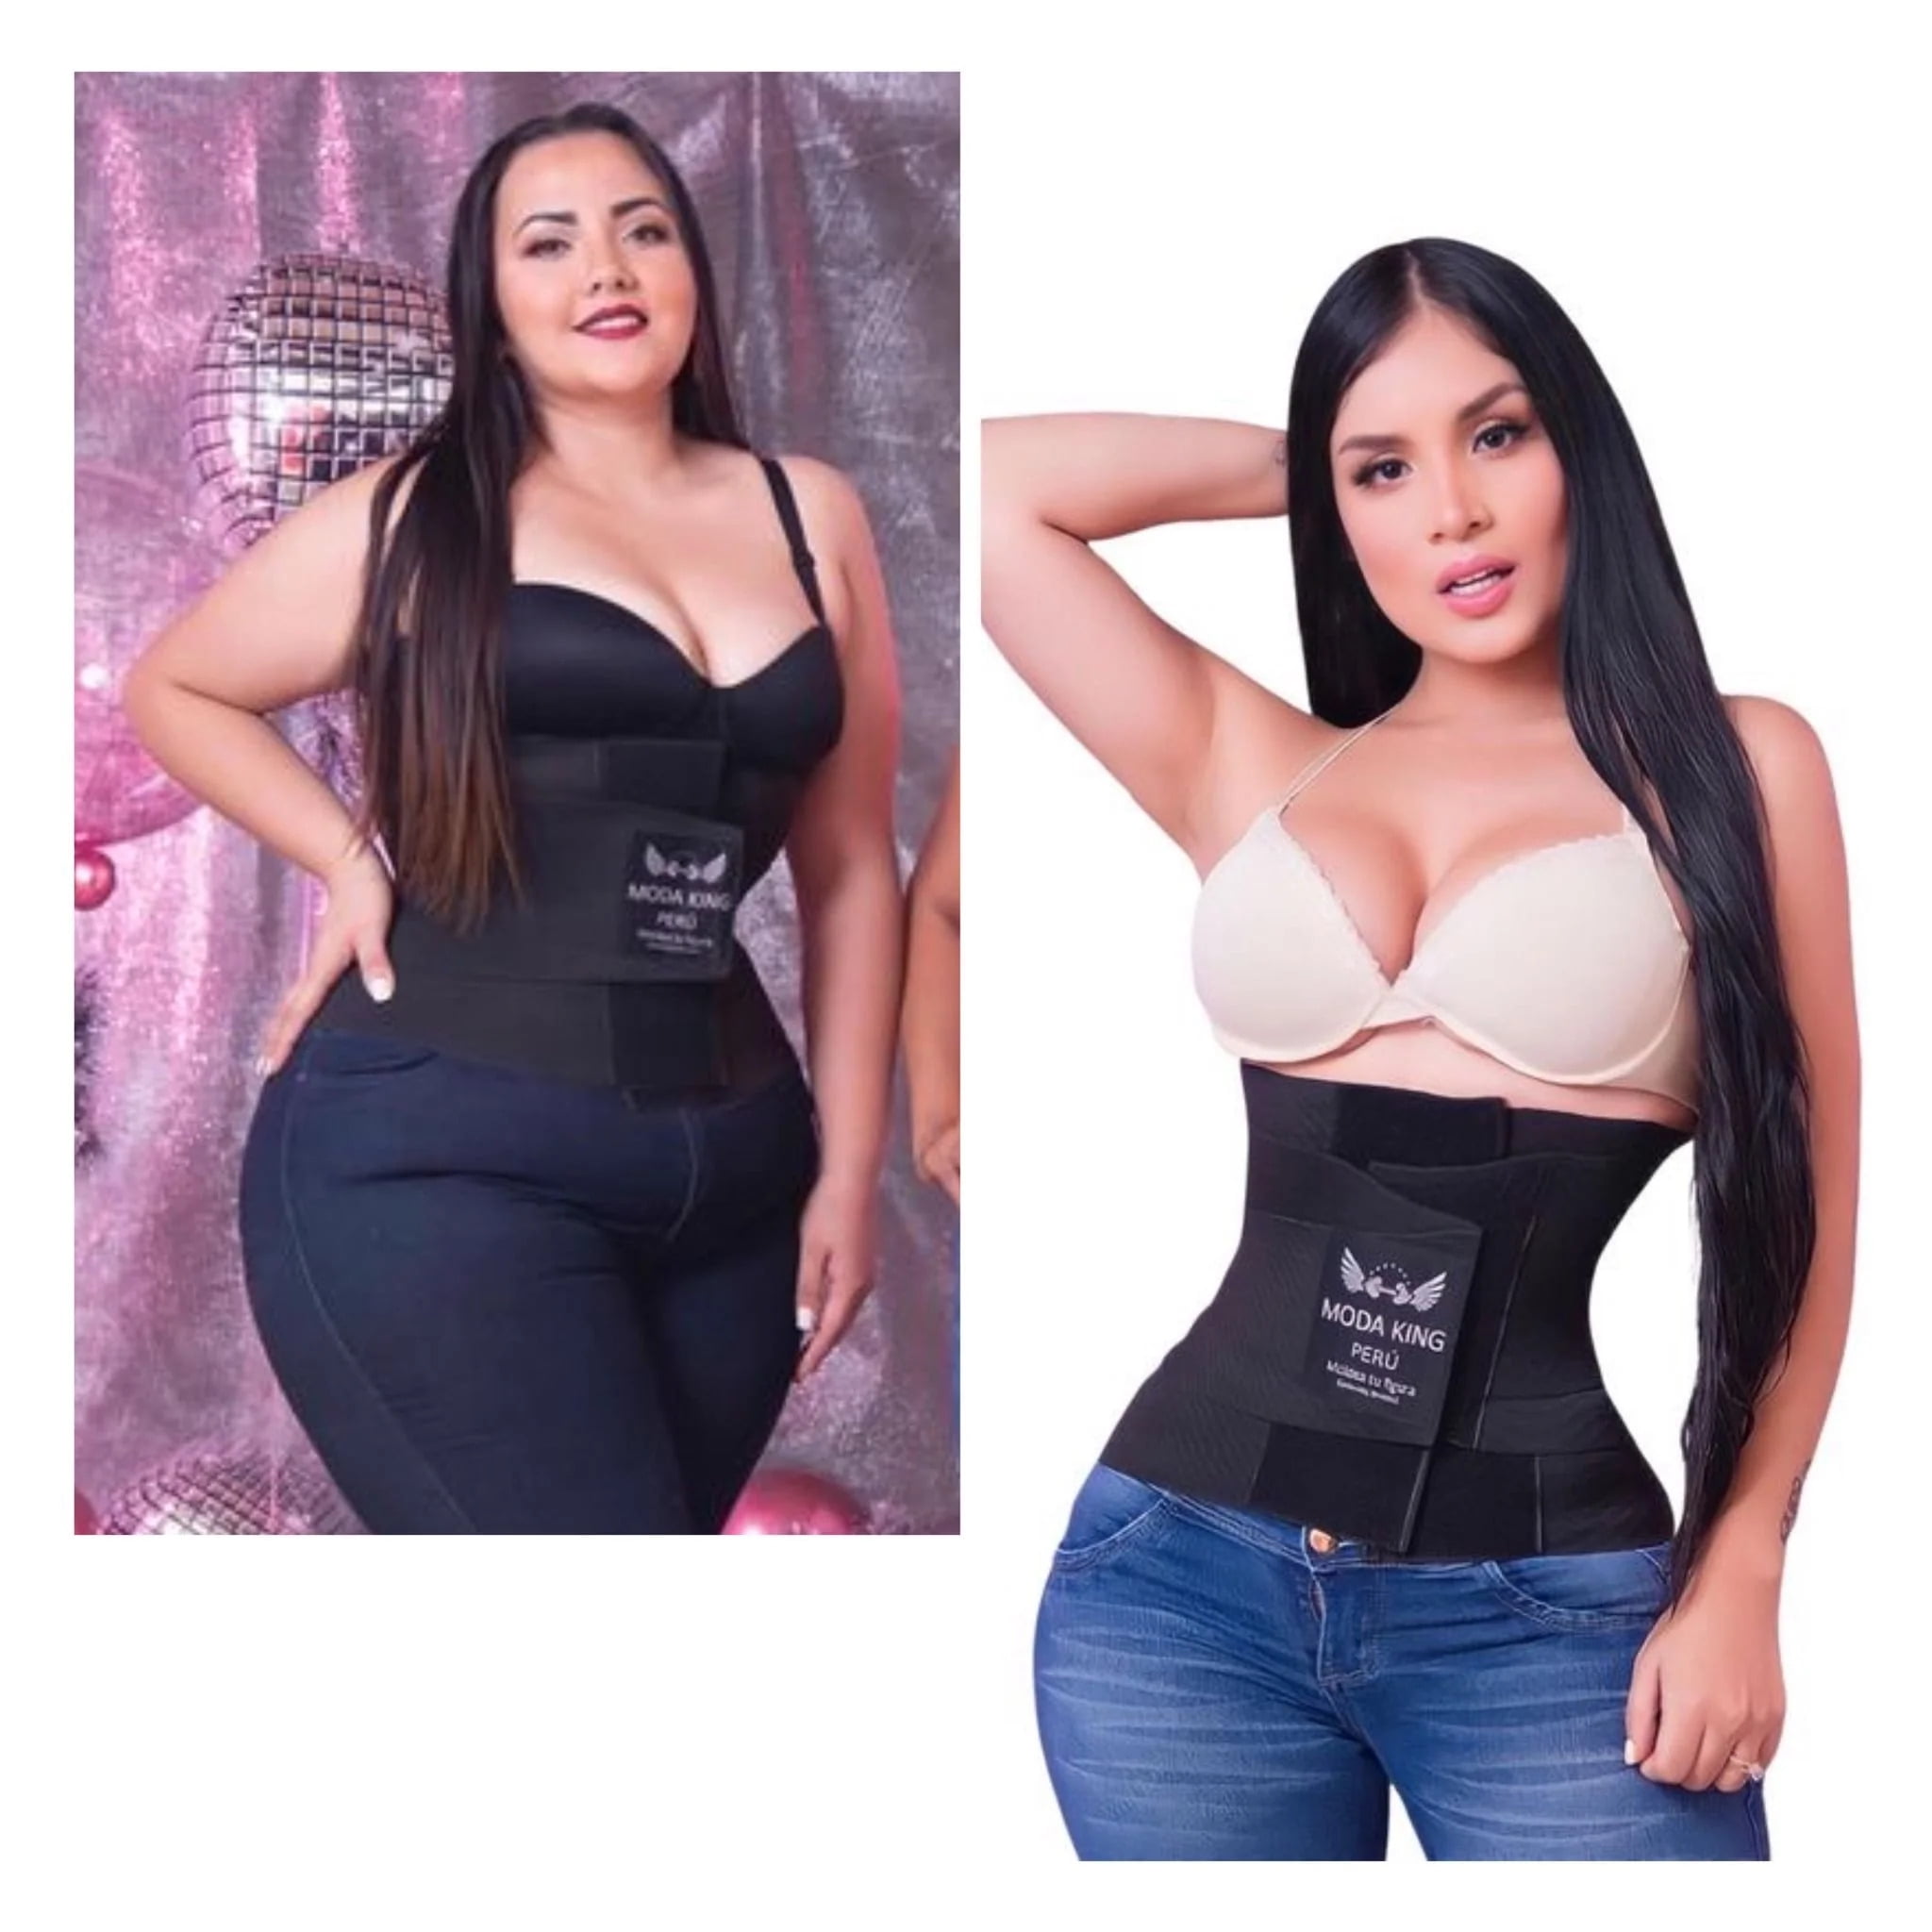 Body Shapers for sale in Miramiguoa Park, Missouri, Facebook Marketplace